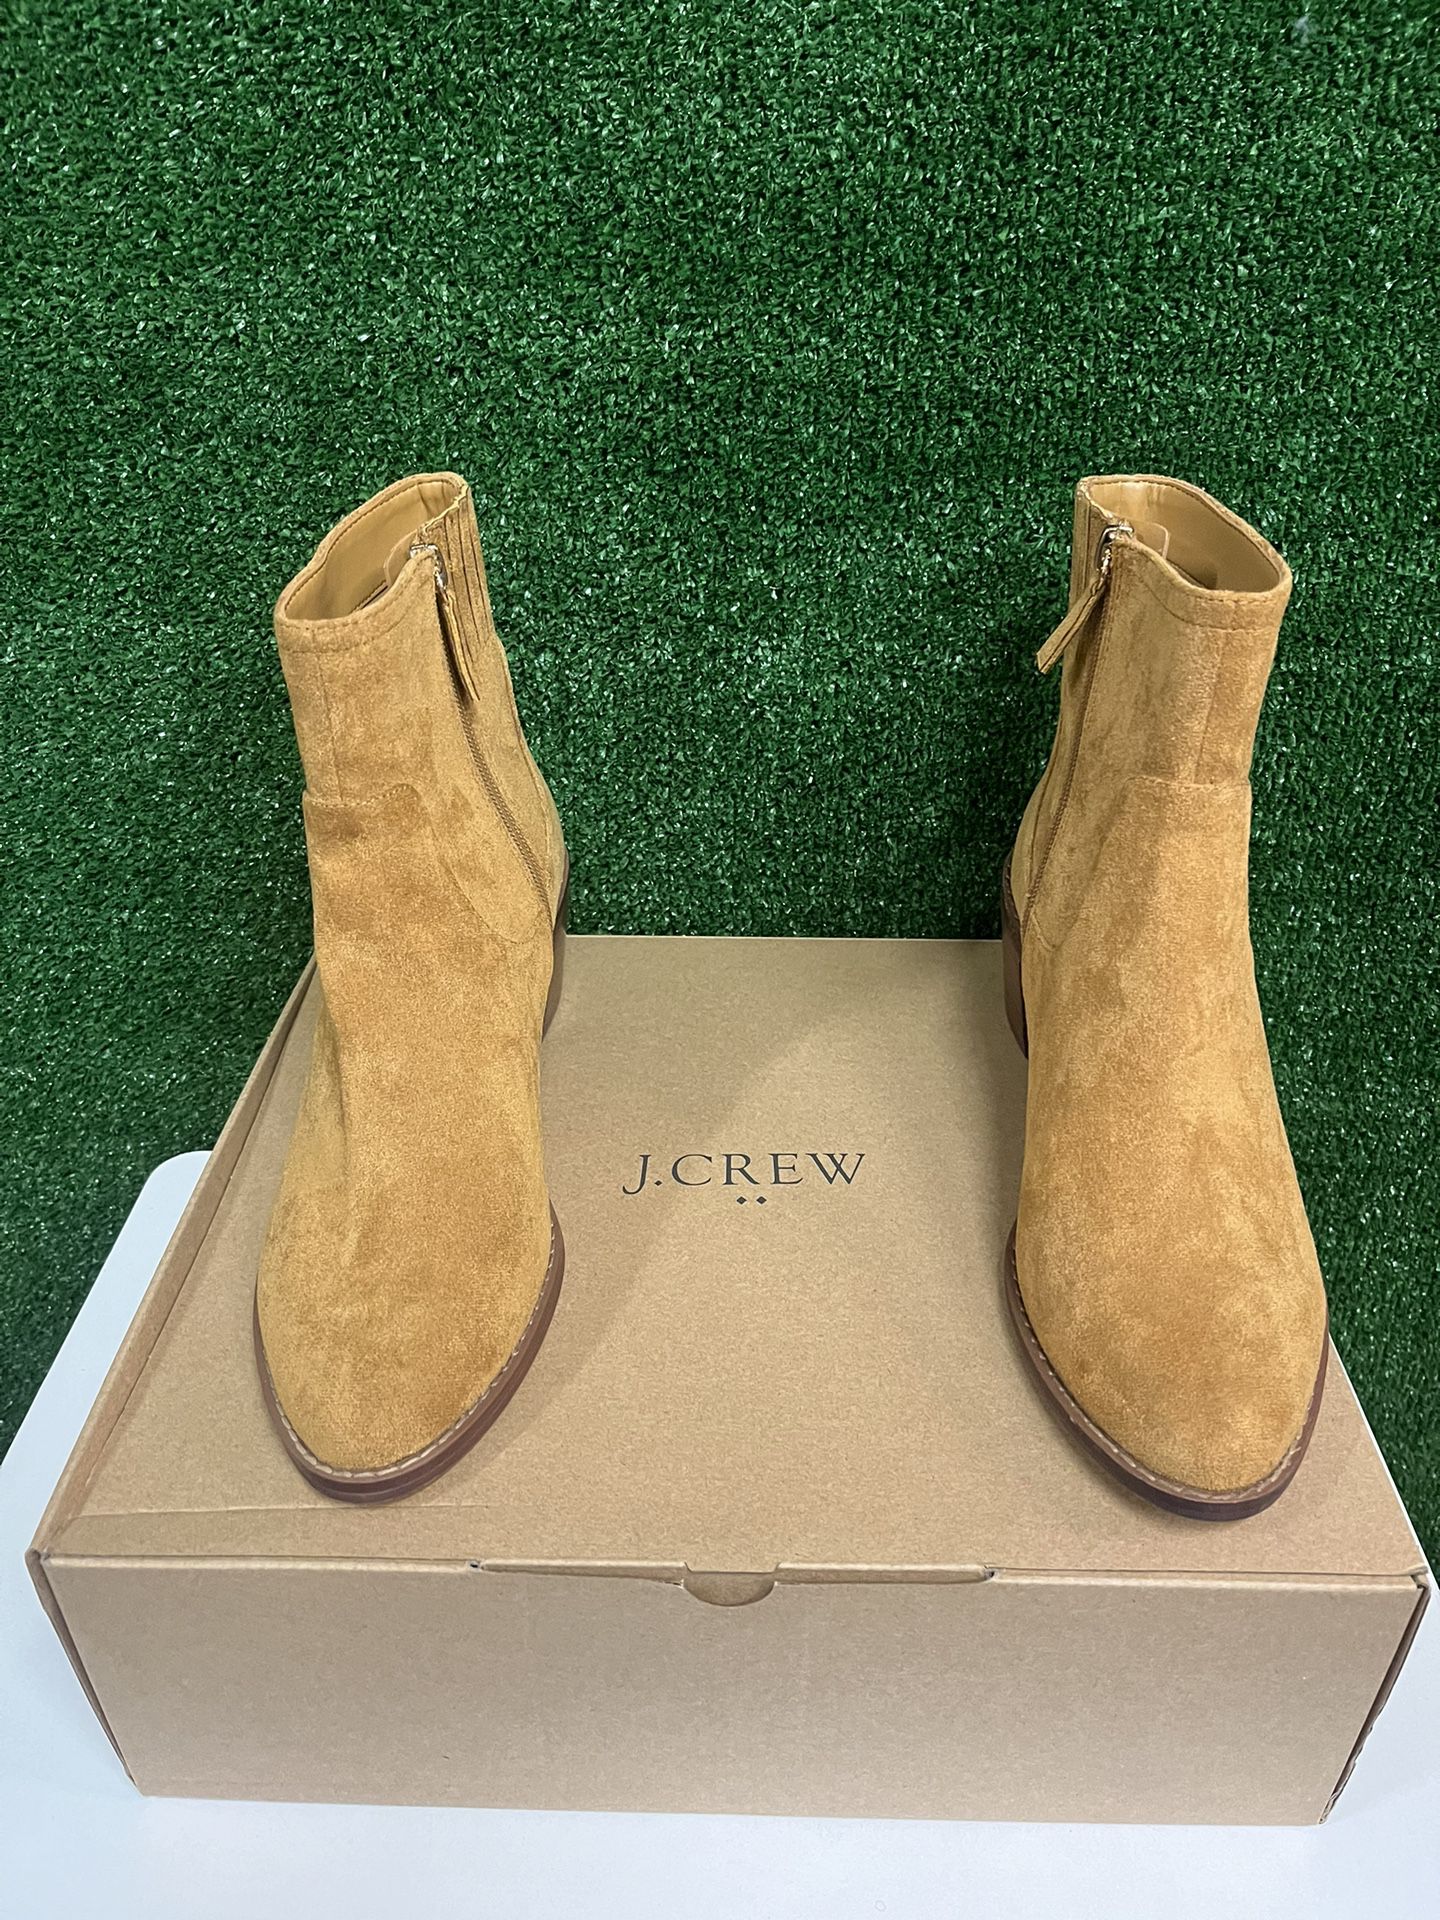 J Crew Brown Suede Boots Size 9 Brand New 